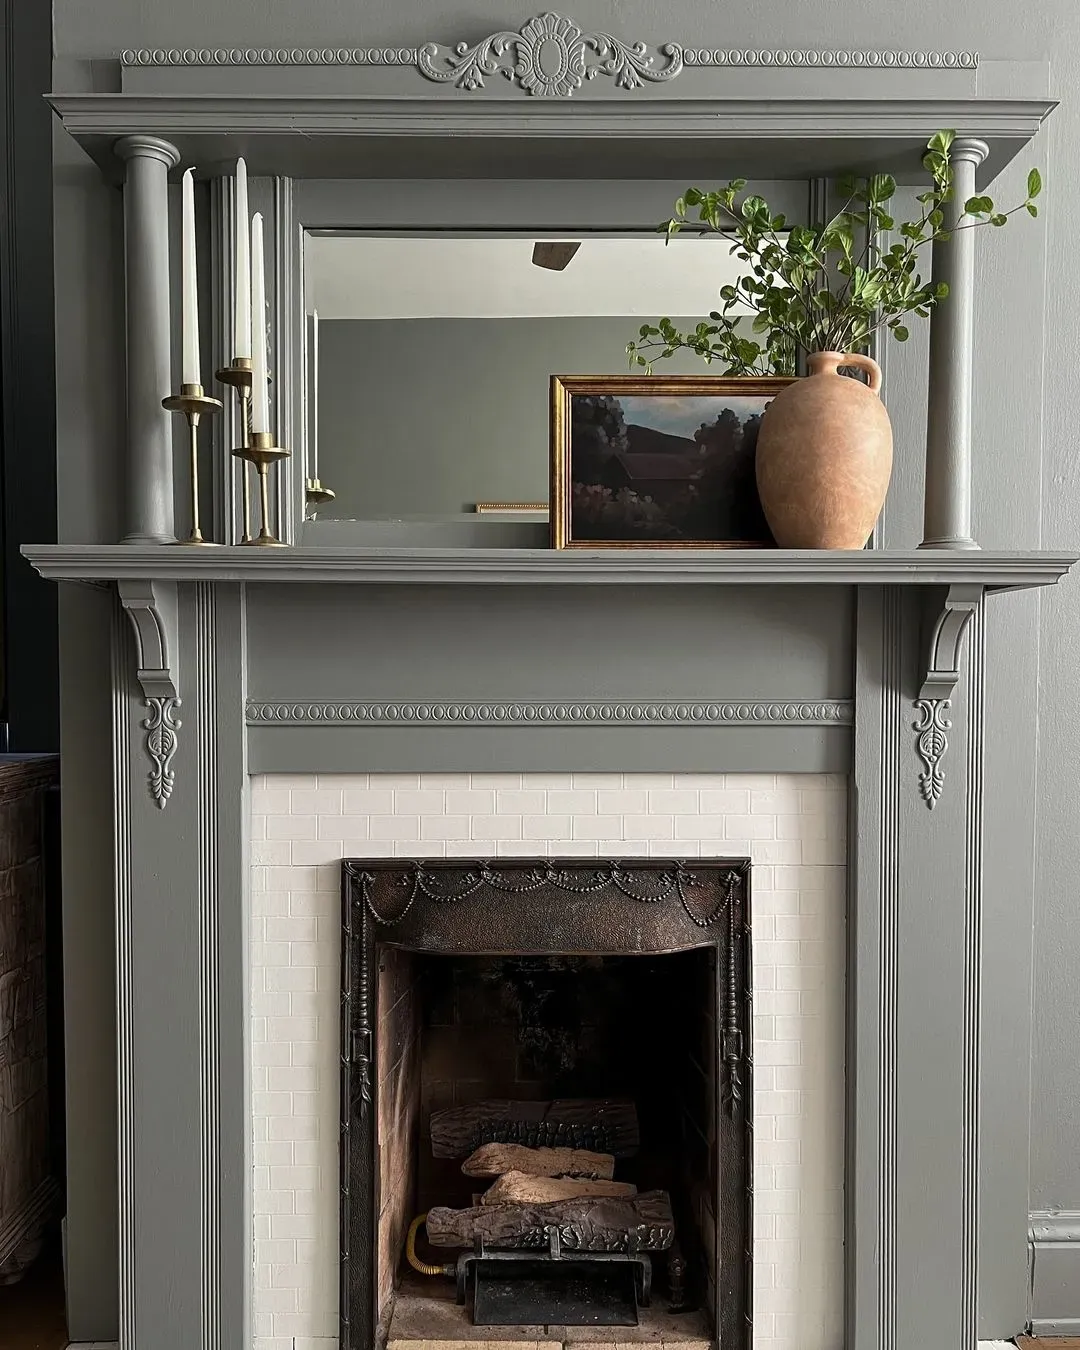 SW Illusive Green living room fireplace paint